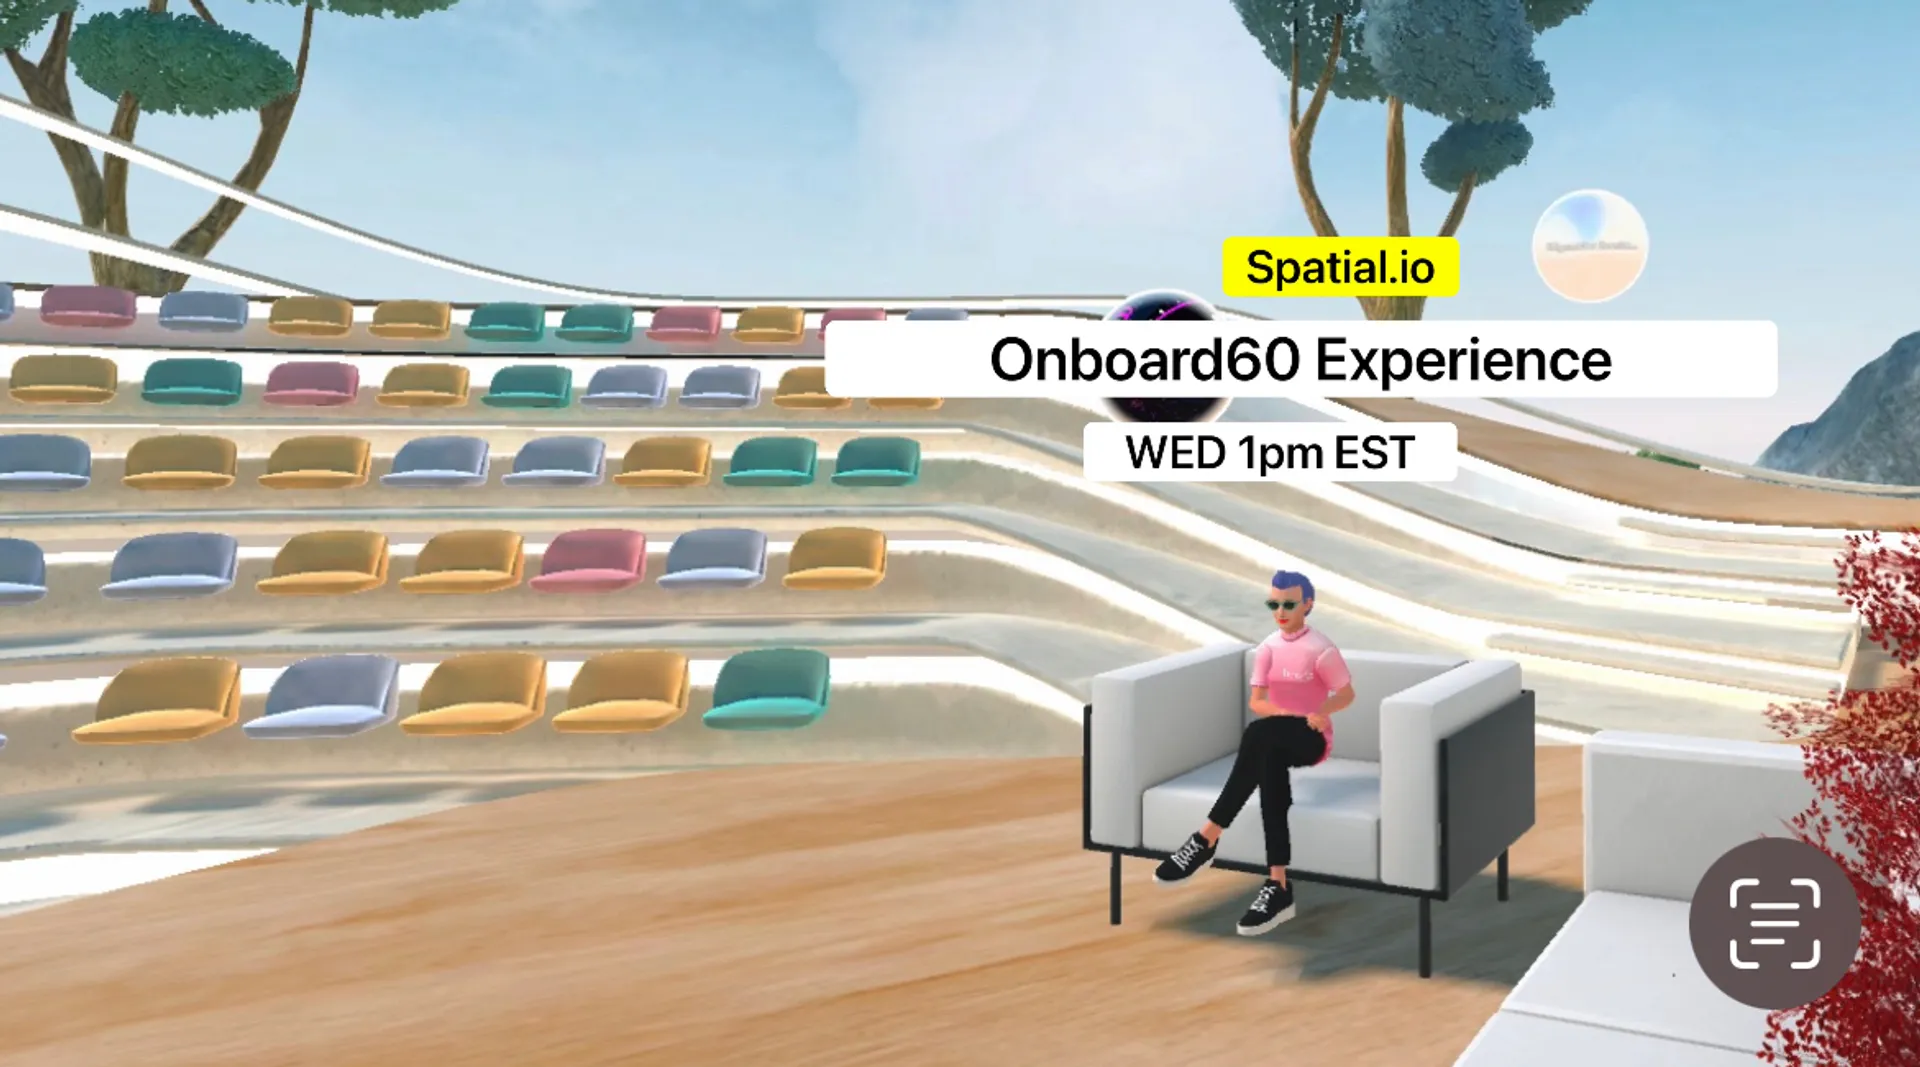 GMGMGM 

I have set up Onboard60 Experience with an auditorium for live chats. Speakers, topics, open discussions. Wednesdays at 1pm EST on Spatial.io 

If you want to be a speaker or have a topic you want discussed, LMK 

https://www.spatial.io/@Onboard60